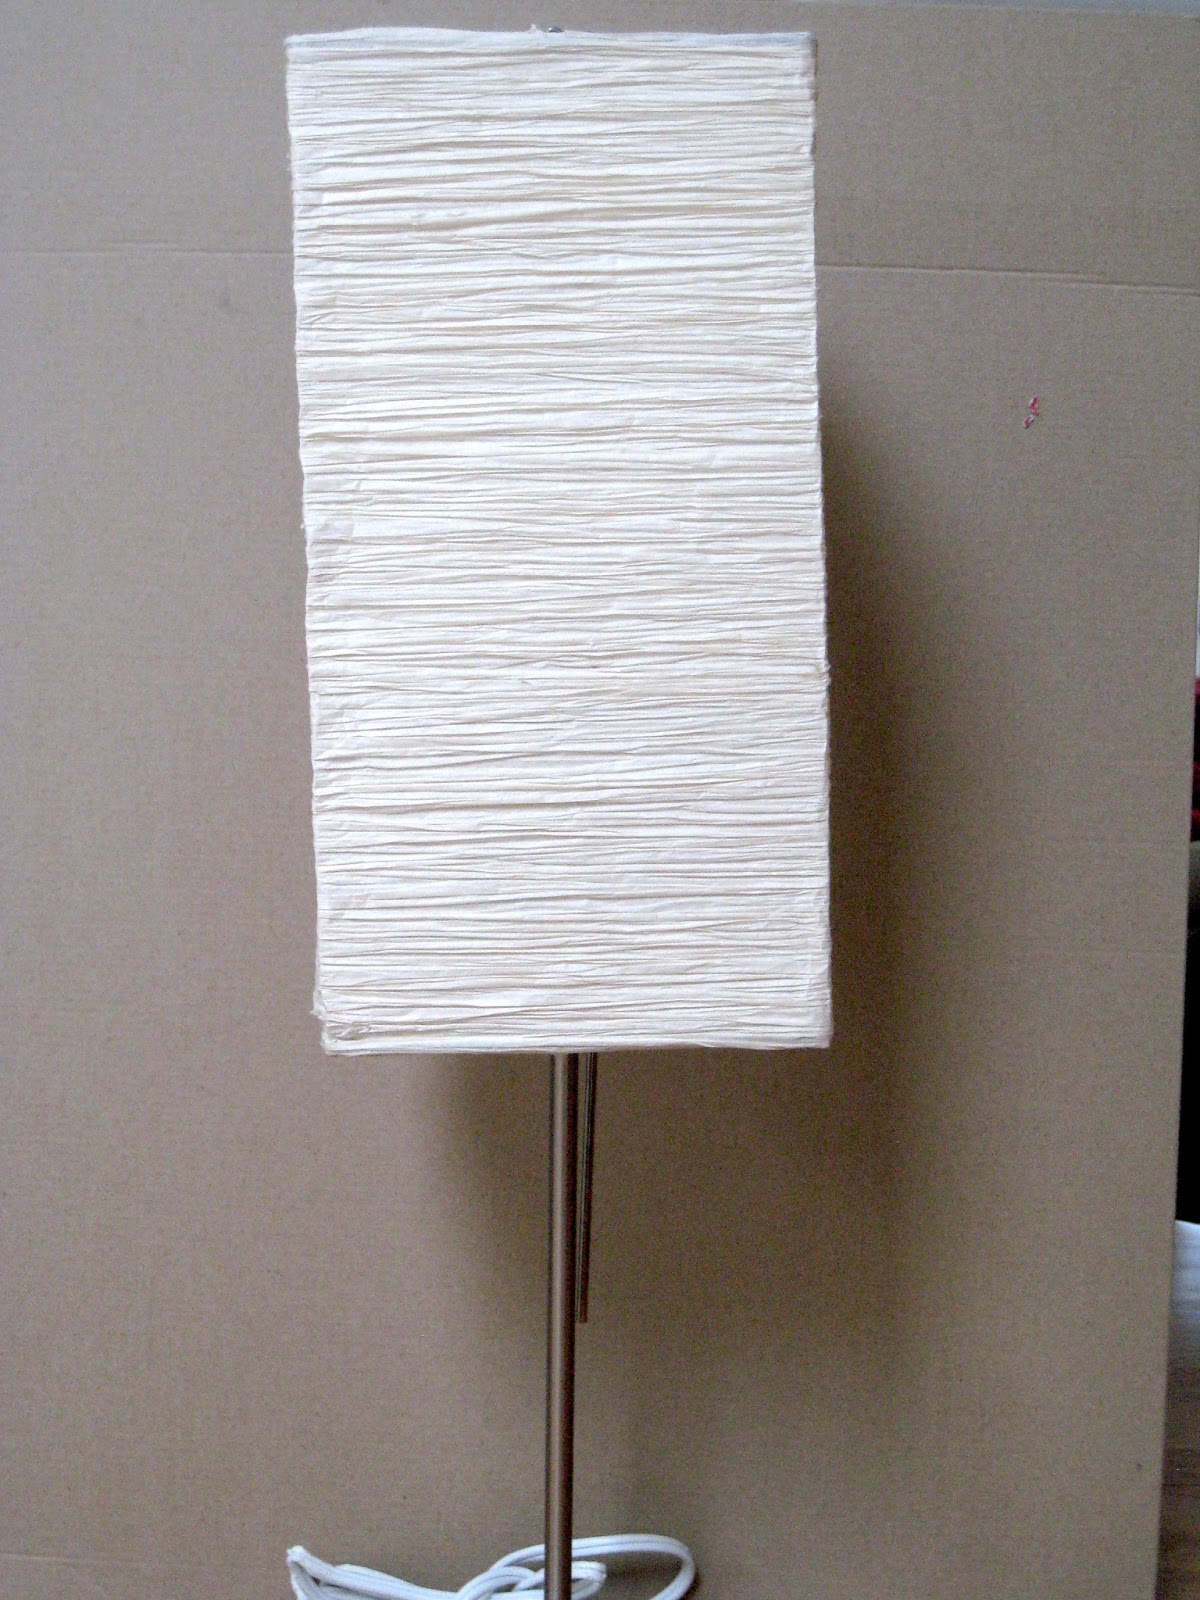 Rhody Life Diy Ikea Orgel Lamp Shades, Replacement Paper Shade For Ikea Floor Lamp